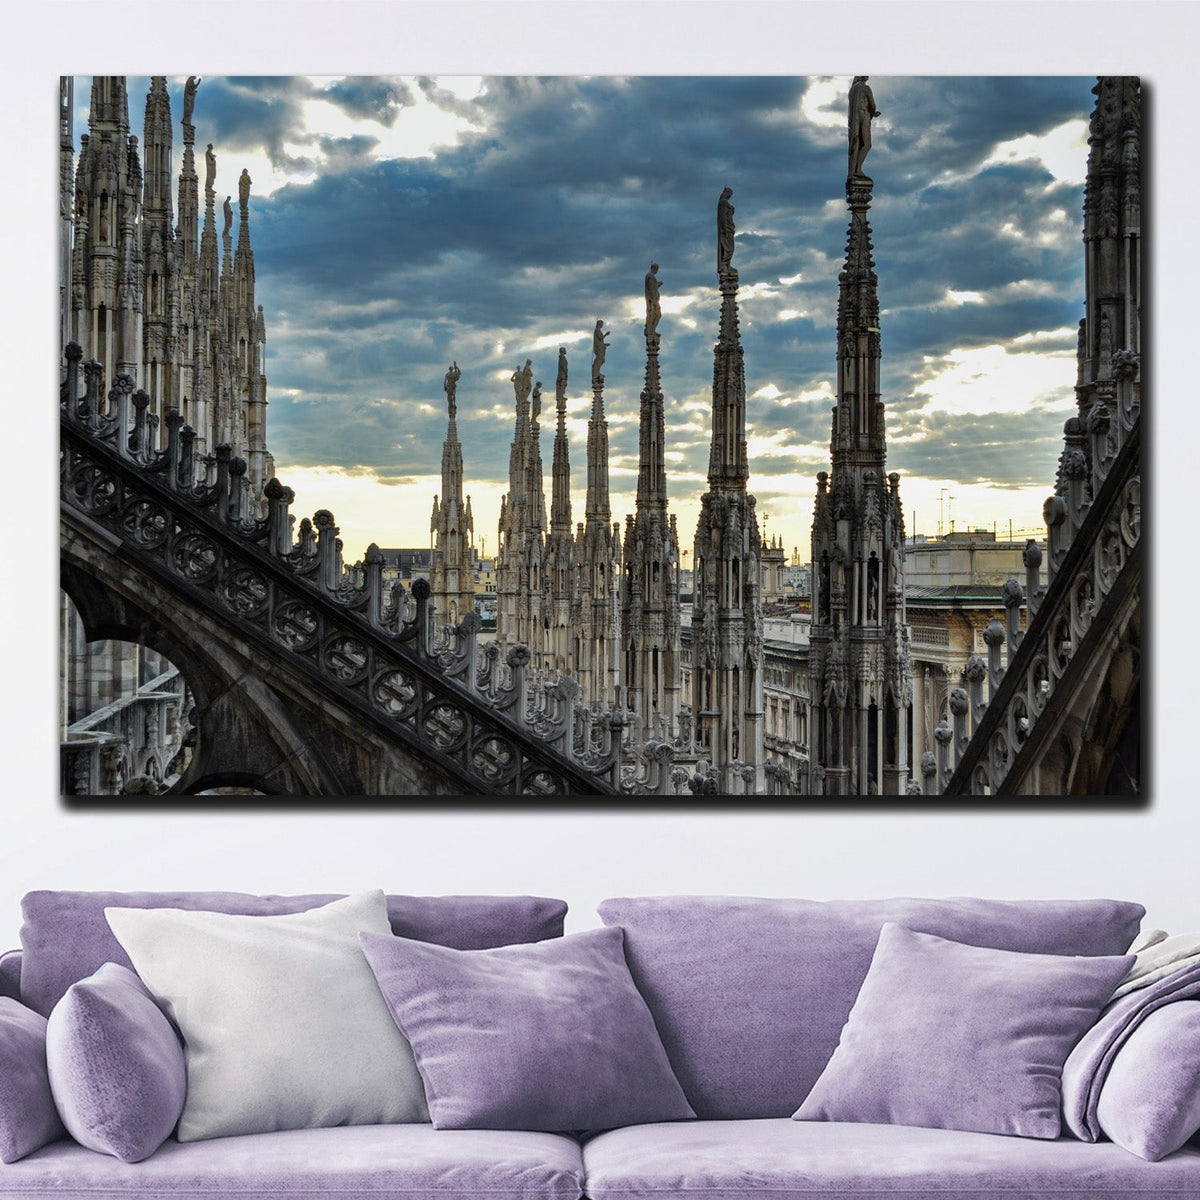 https://cdn.shopify.com/s/files/1/0387/9986/8044/products/RoofTerracesofCathedralDuomoCanvasArtprintStretched-2.jpg